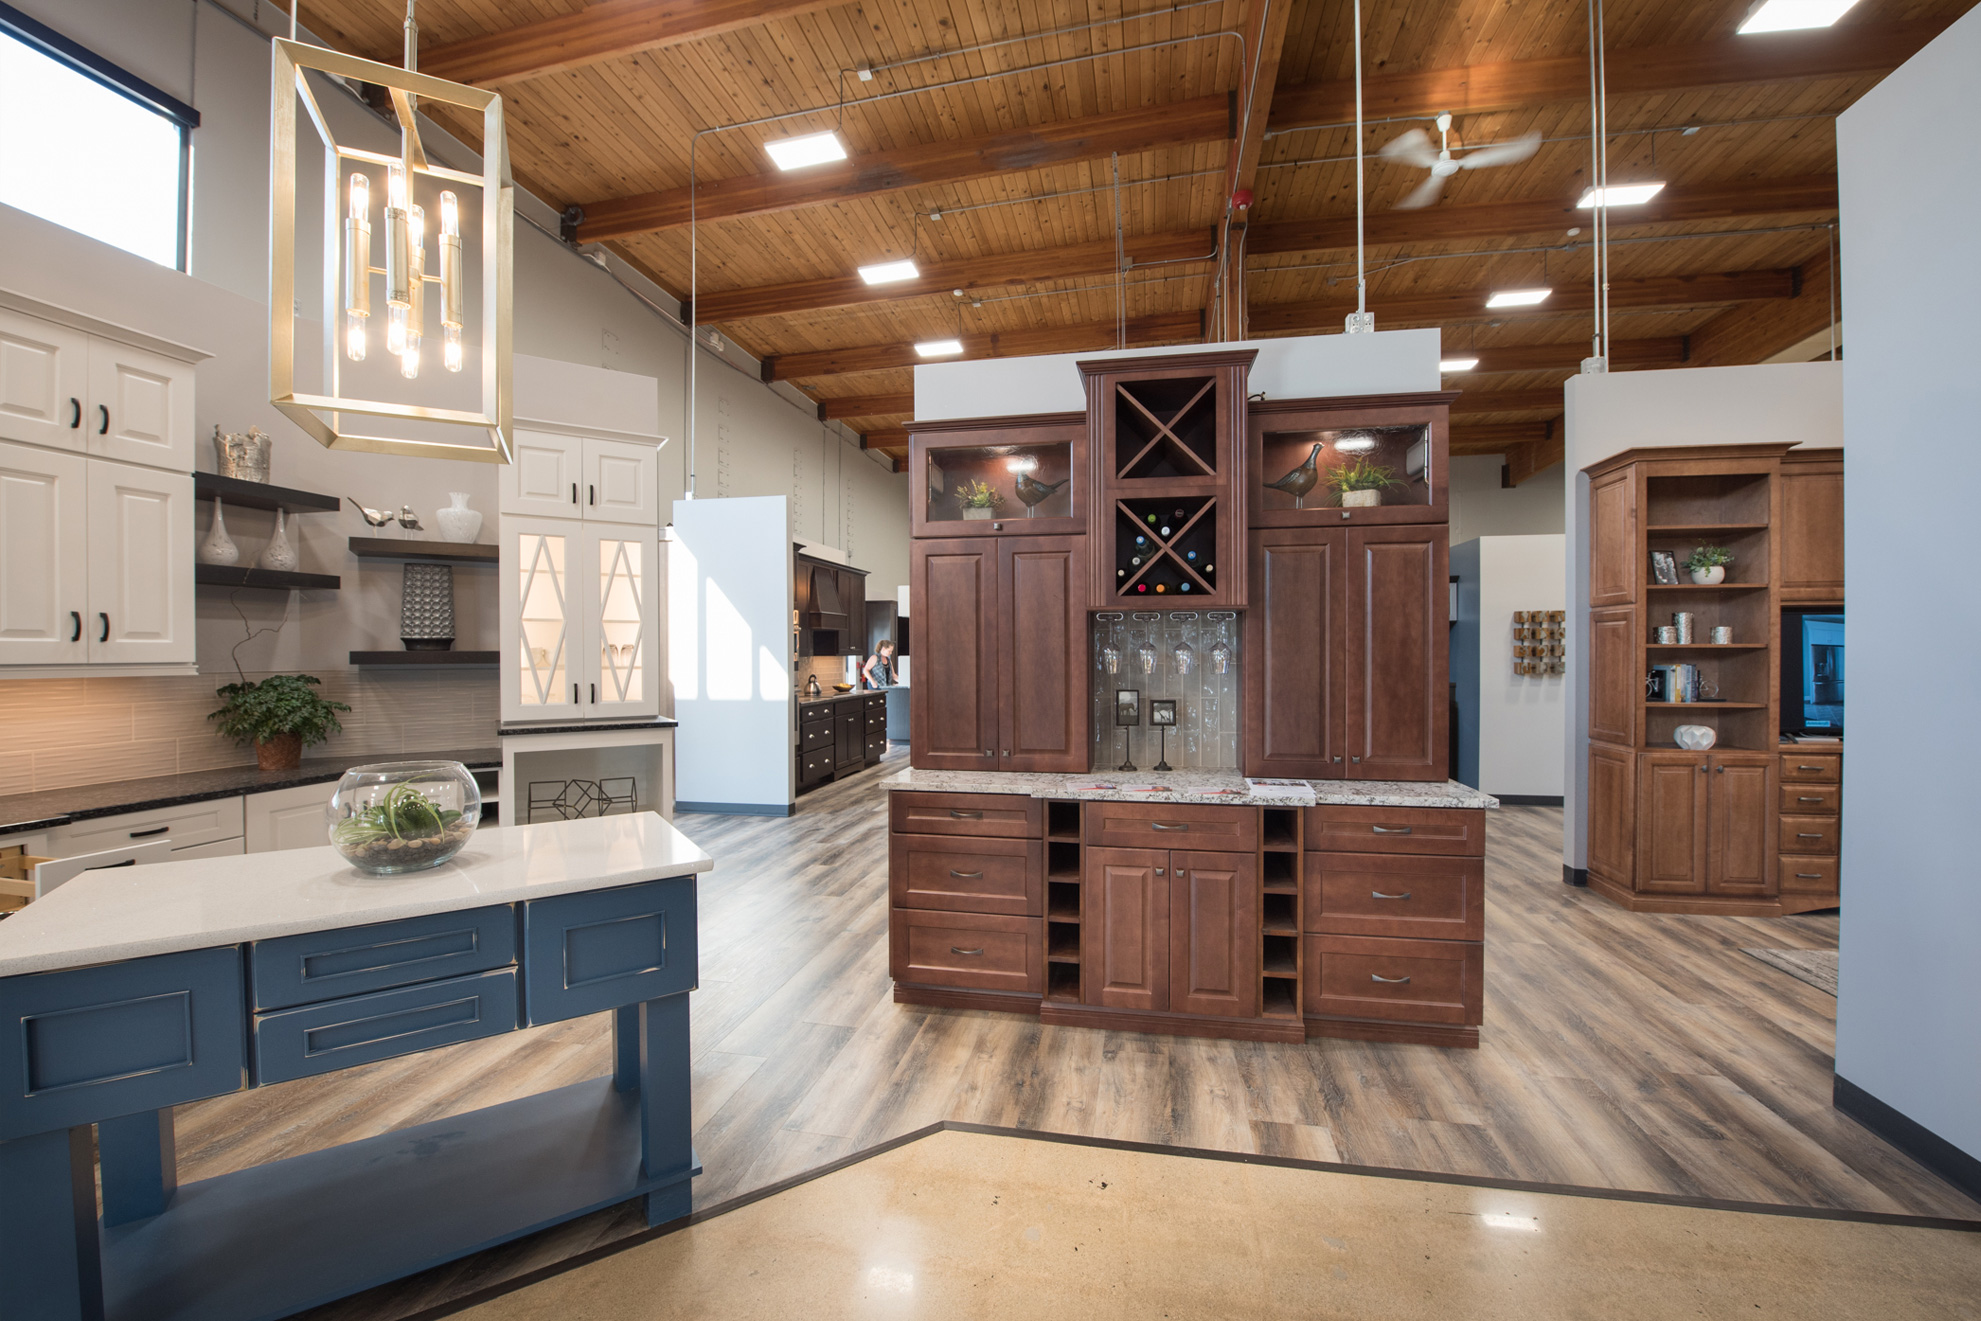 Explore our wide selection of cabinetry, countertops, hardware & more